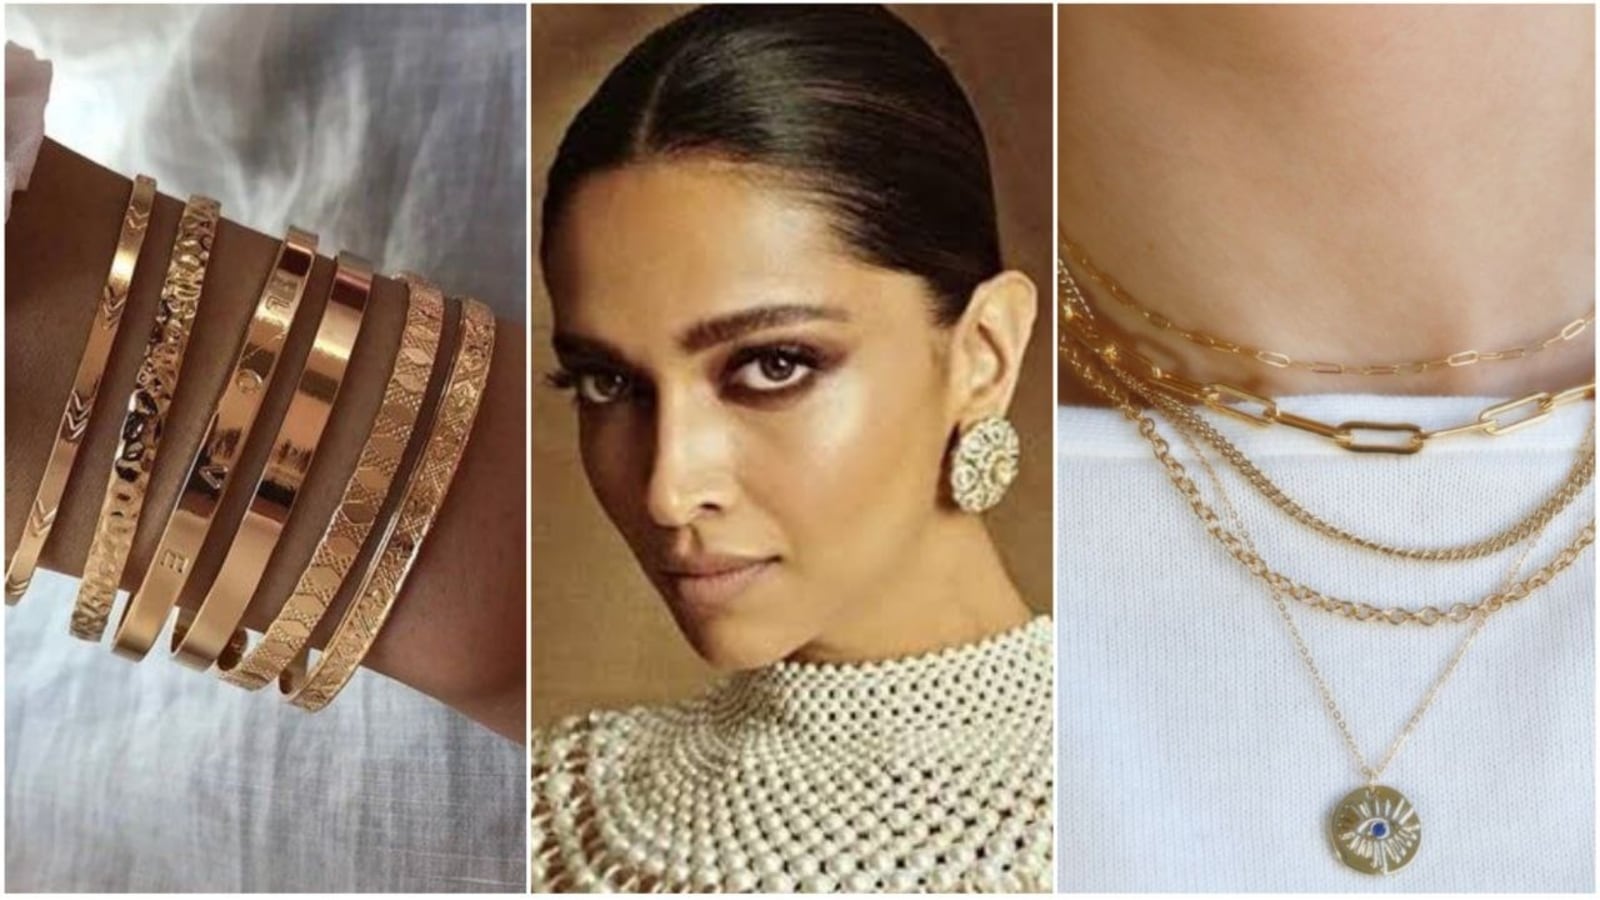 These Are the Top Jewelry Trends for 2023, According to